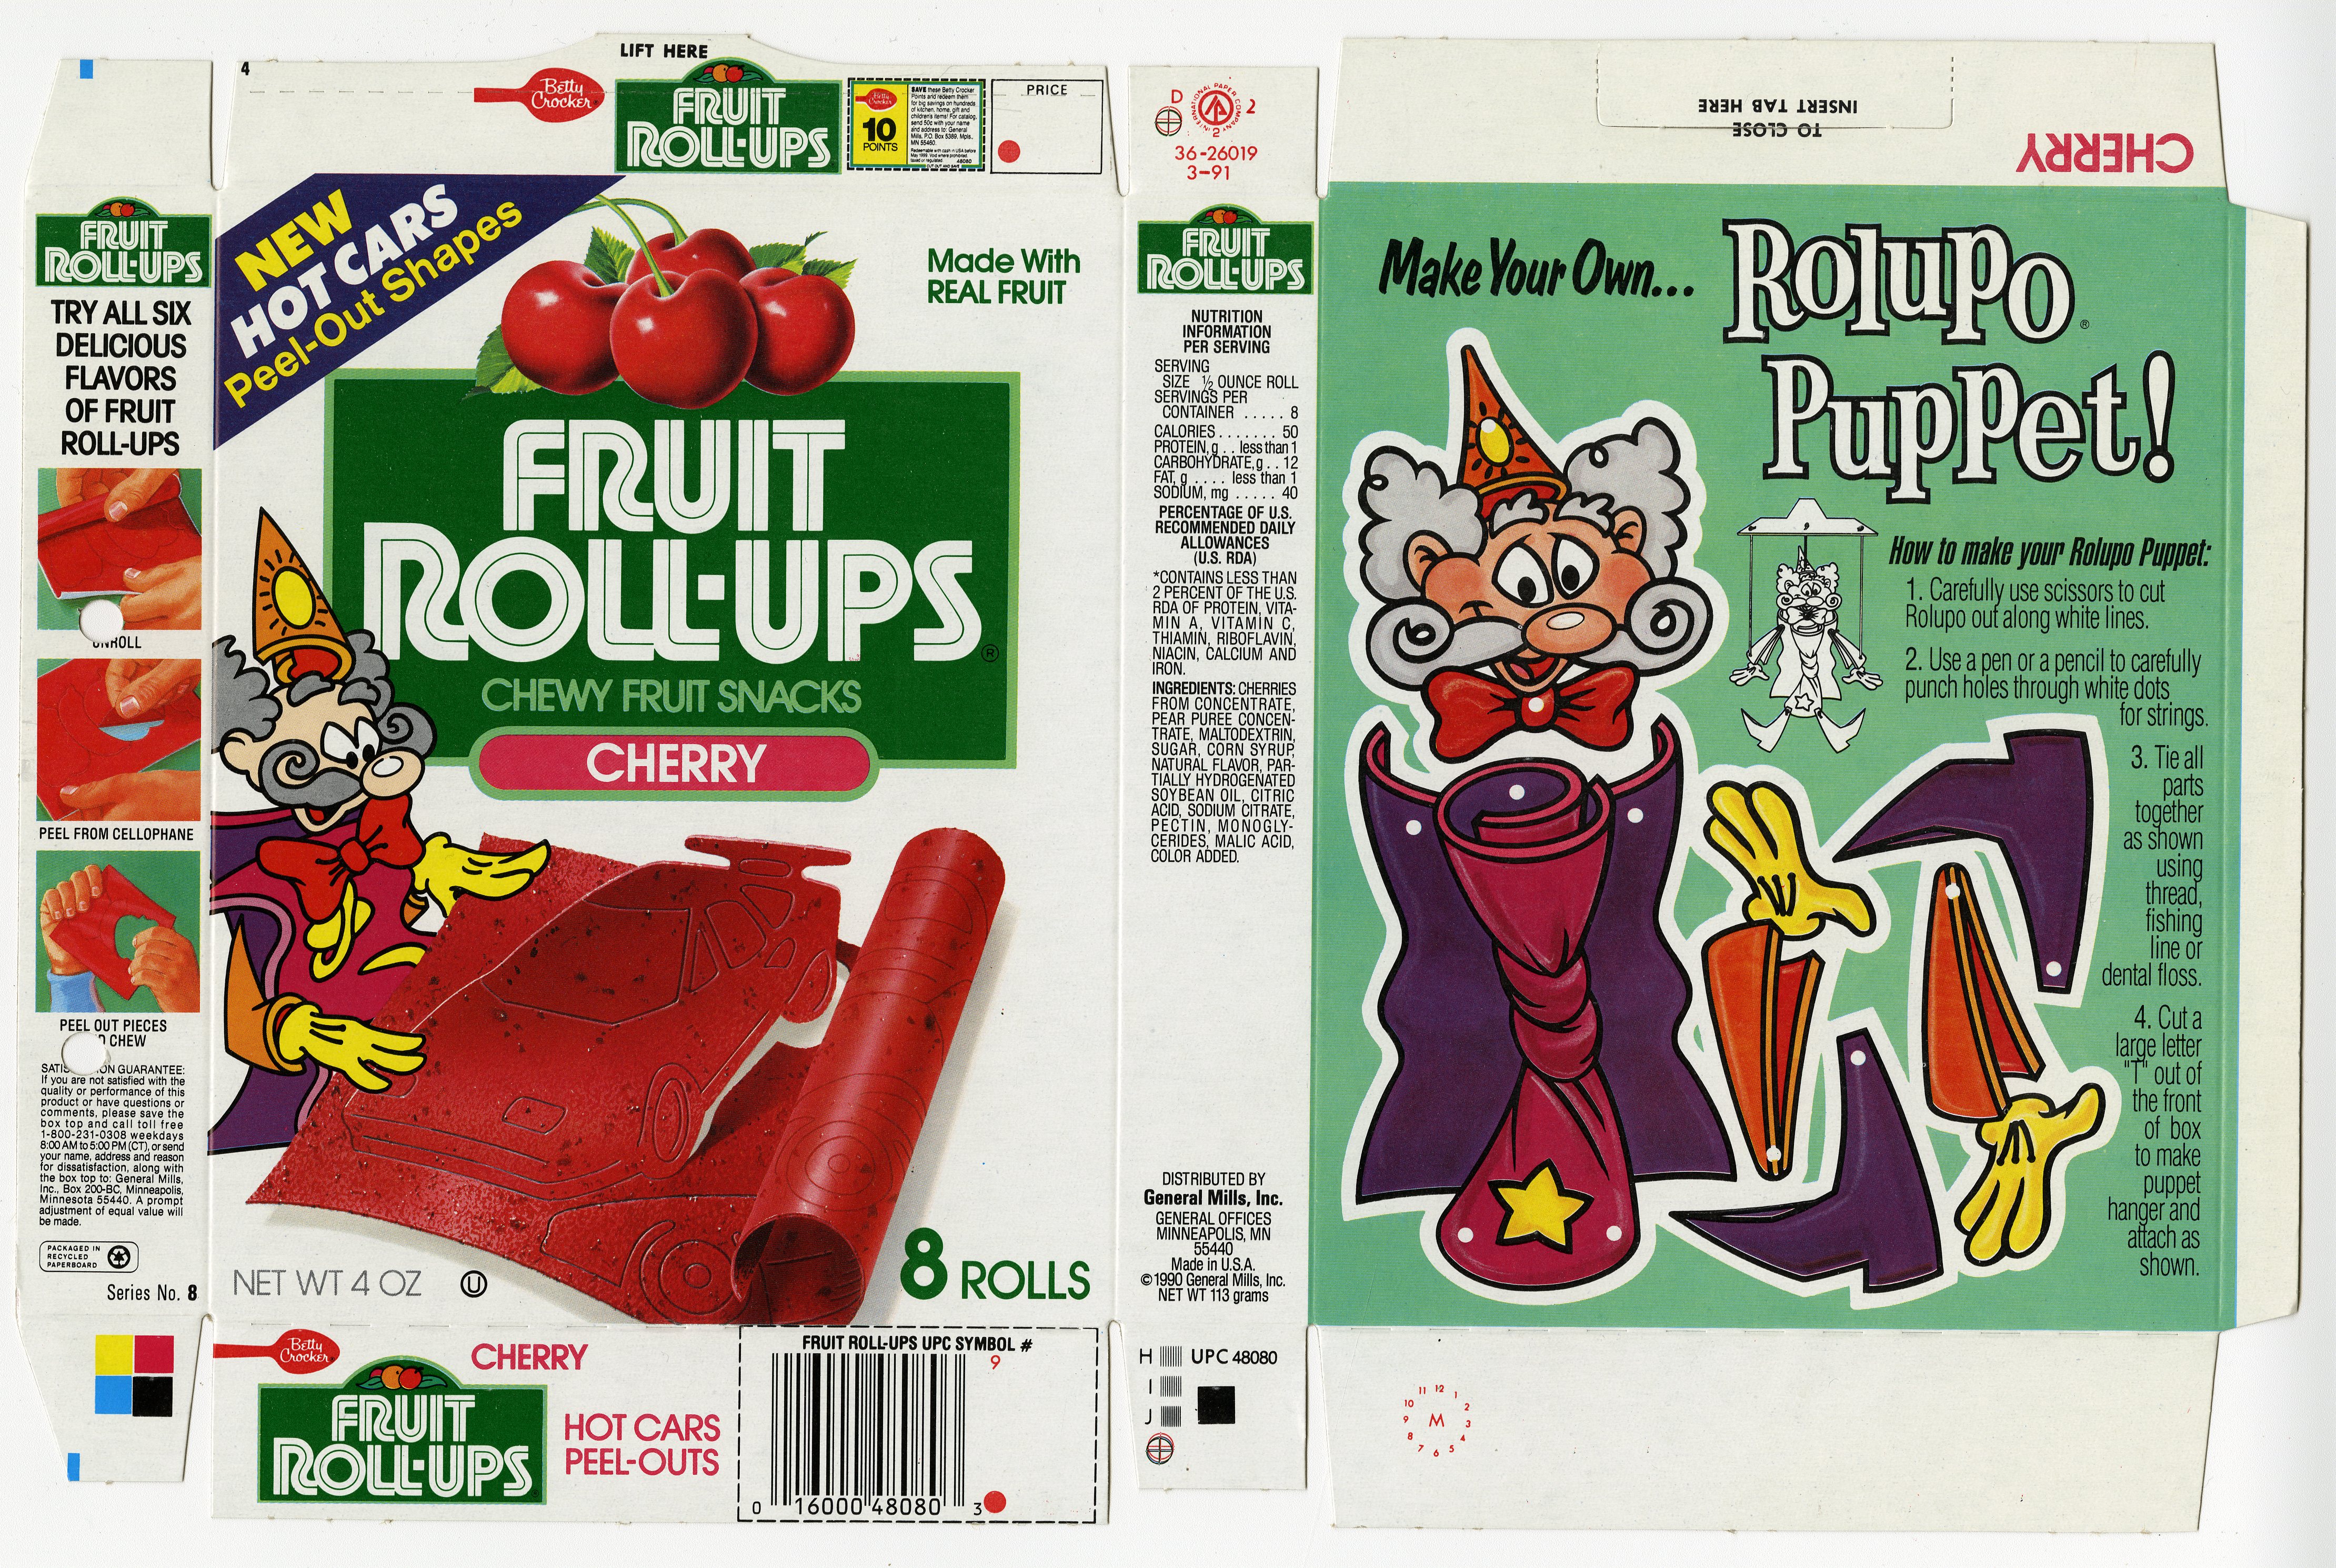 Fruit Roll-Ups packaging with Rolupo mascot